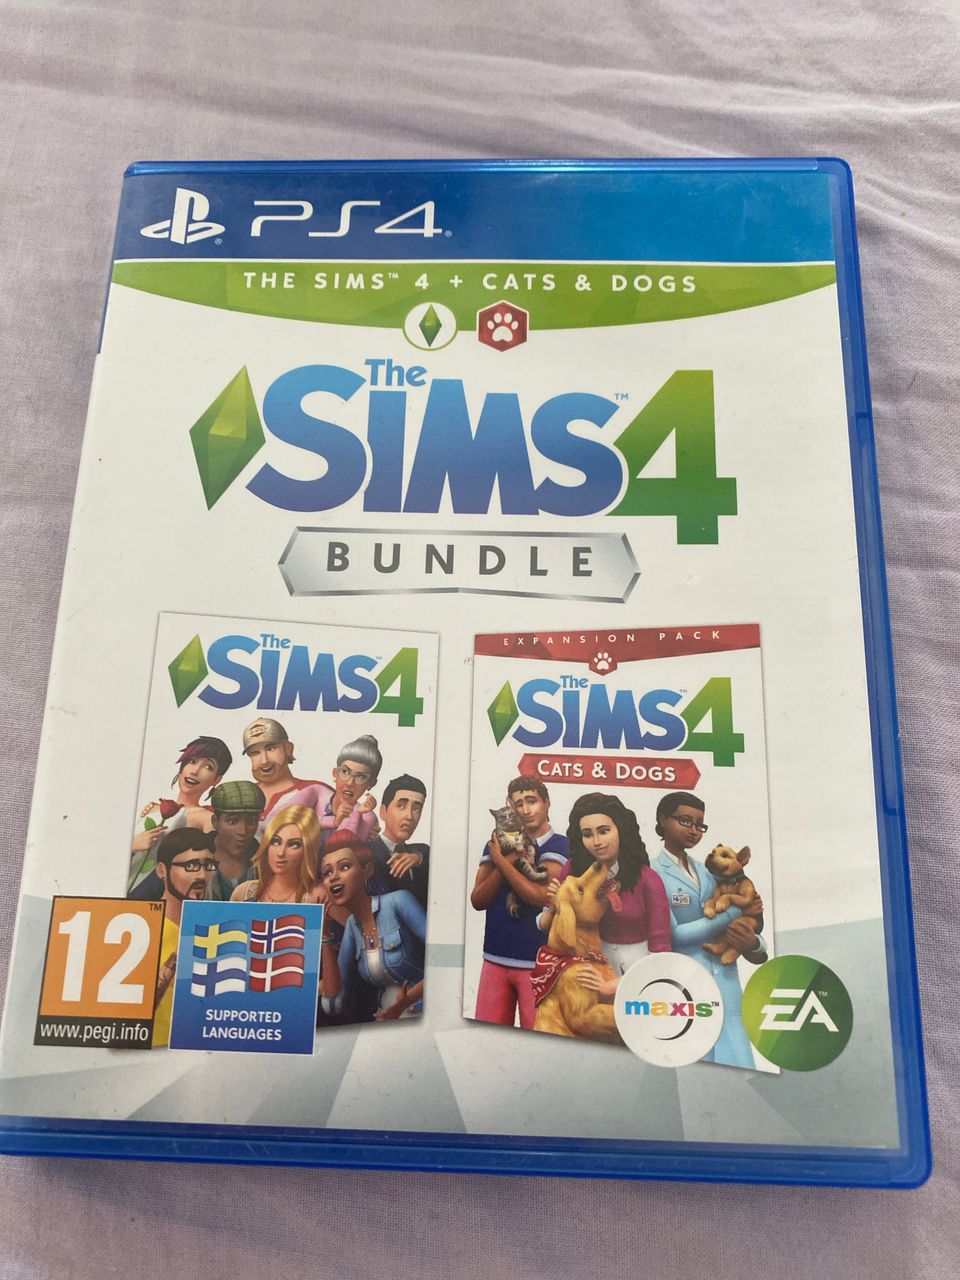 Ps4: The siis 4 ja Sims 4 Cats & Dodge